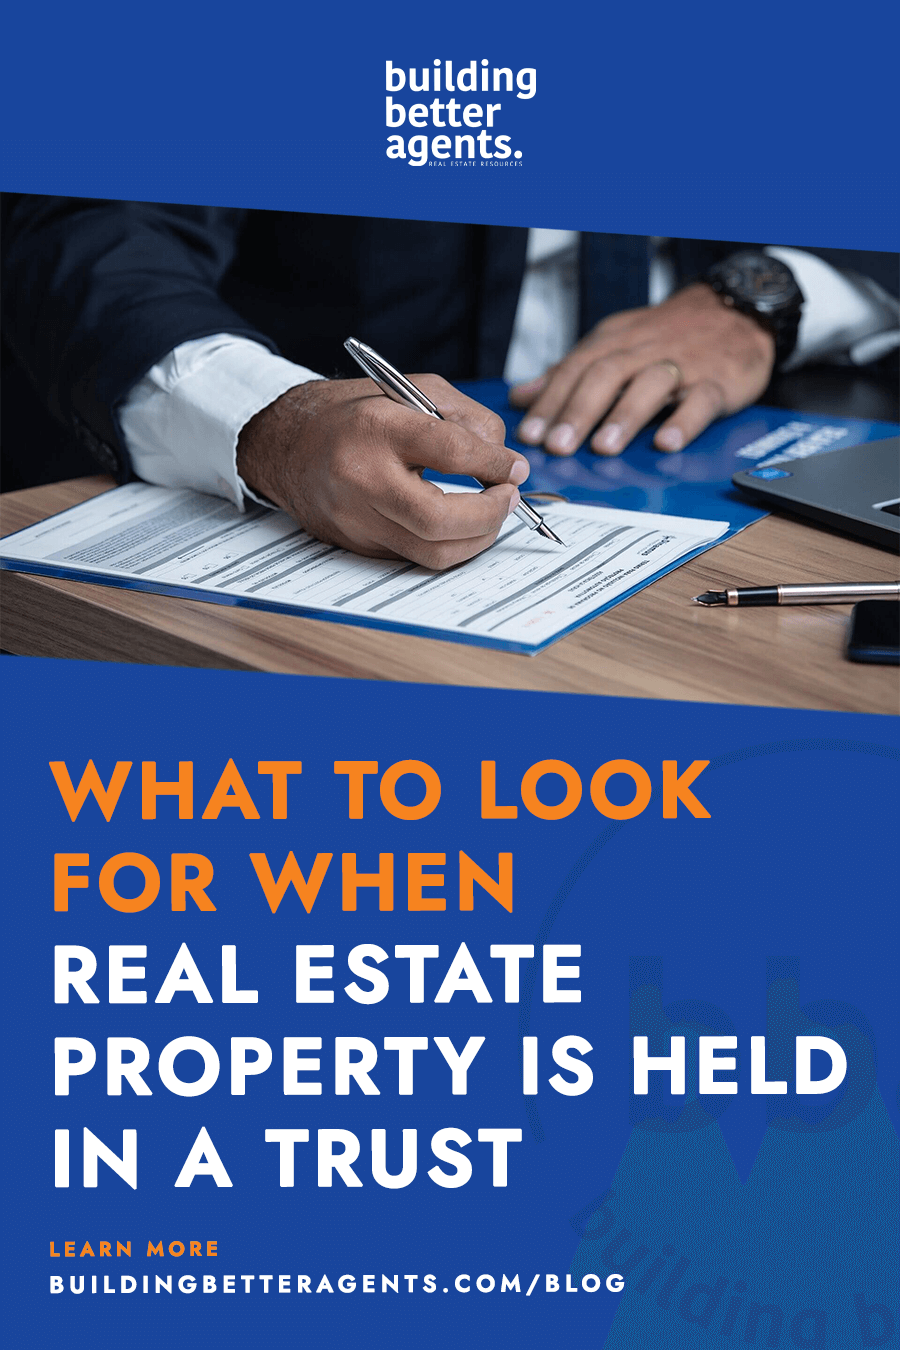 What to Look for When Real Estate Property is Held In a Trust